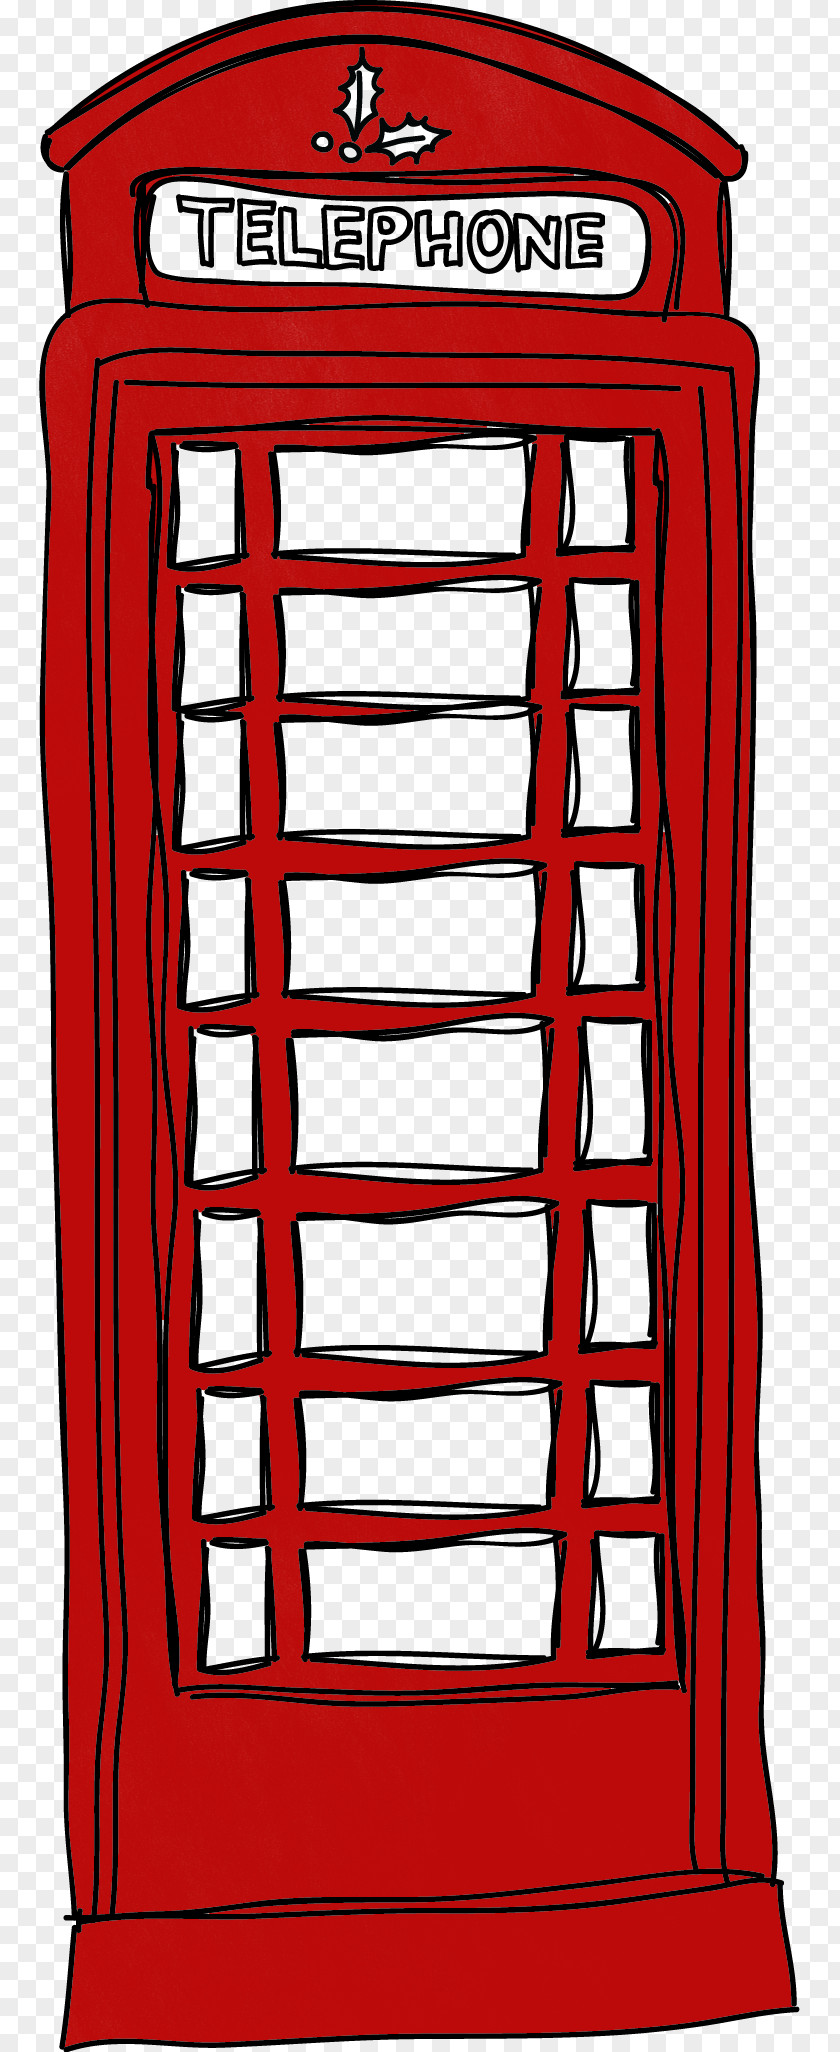 Red Door London Telephone Box Booth Payphone PNG